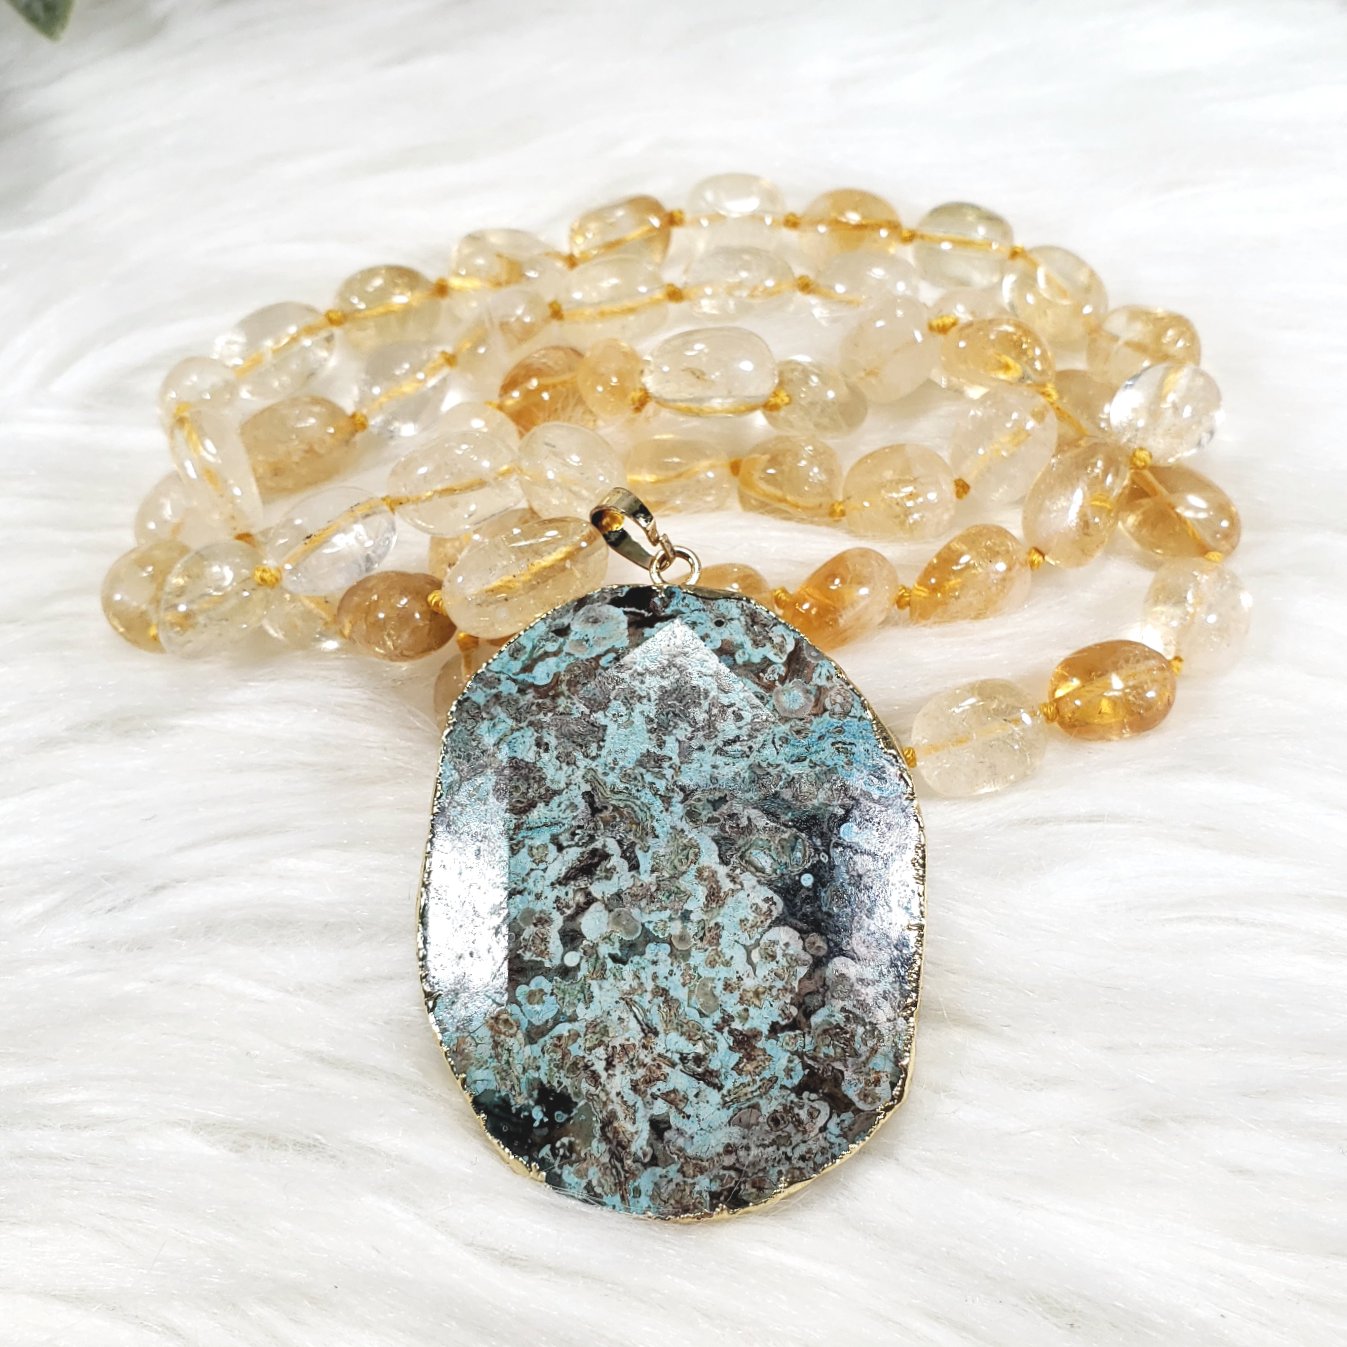 Citrine Nugget Knotted Necklace with a Large Ocean Jasper Pendant - Crystal Happenings